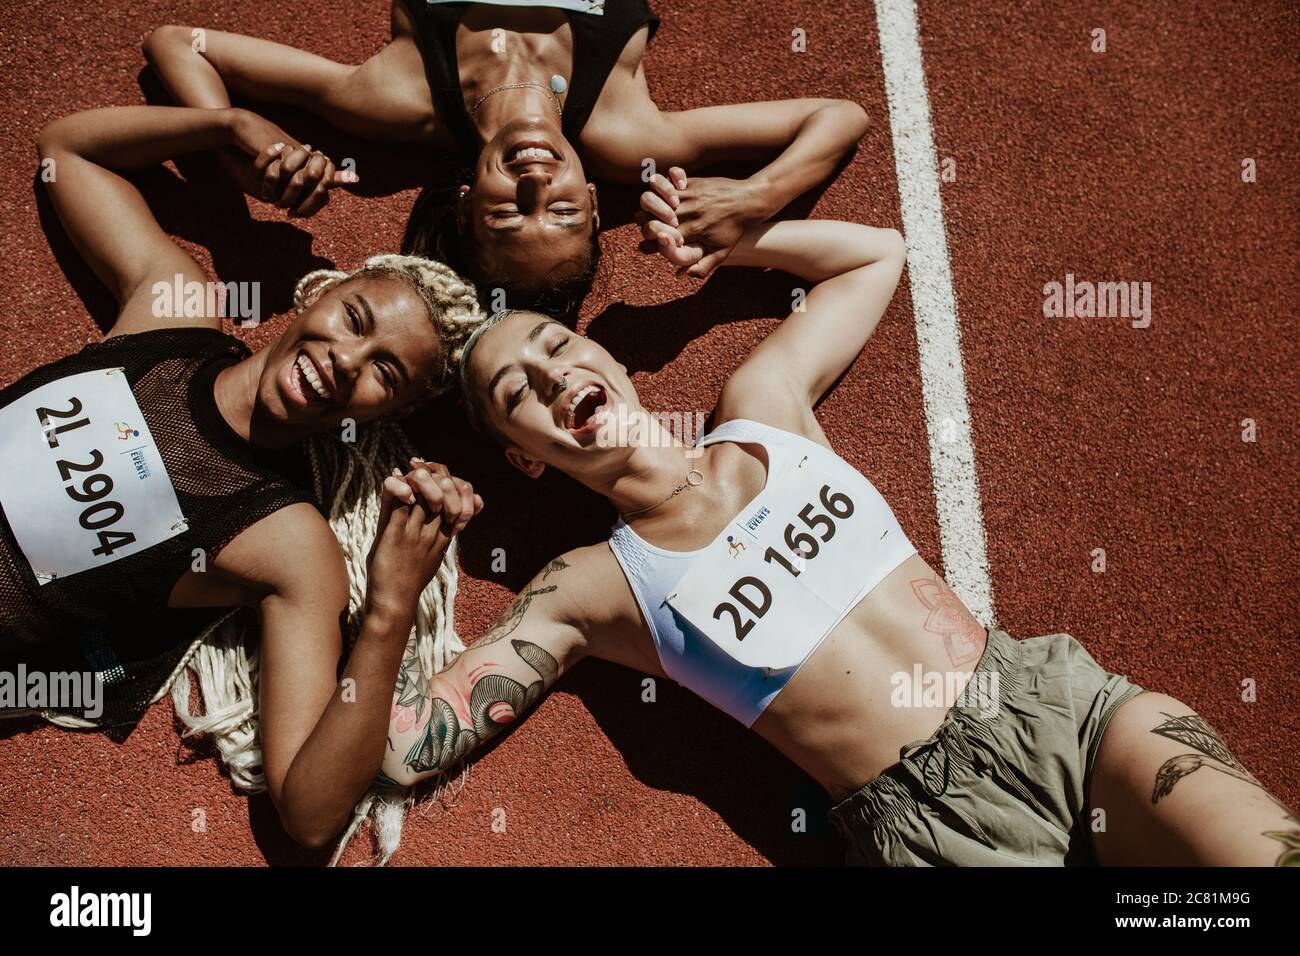 Top view of three female athletes lying together on running track holding hands and smiling while looking at camera. Successful team of runners enjoyi Stock Photo